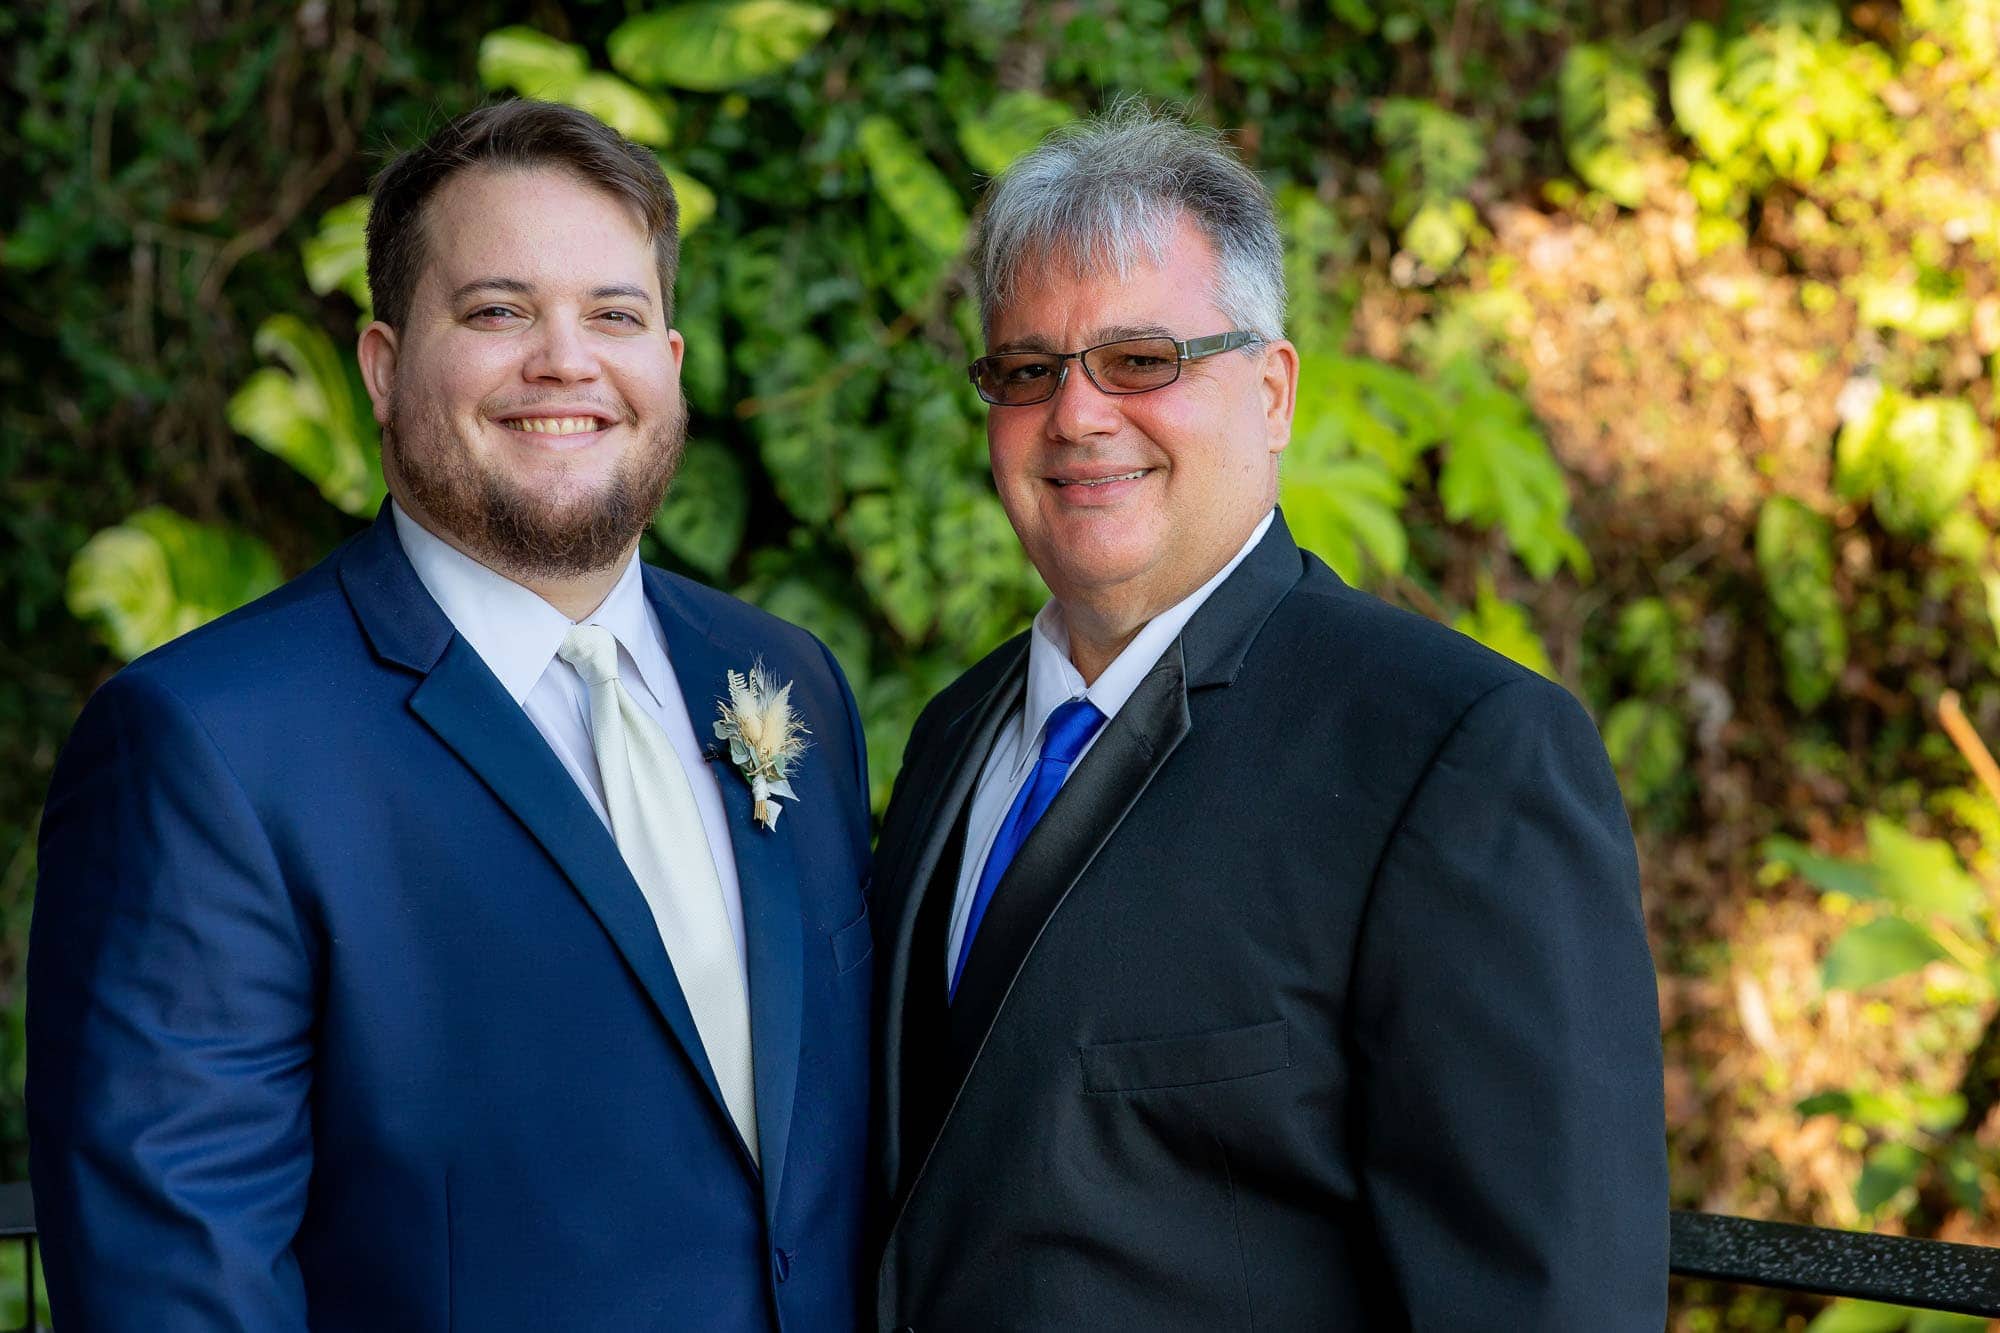 The groom with his dad